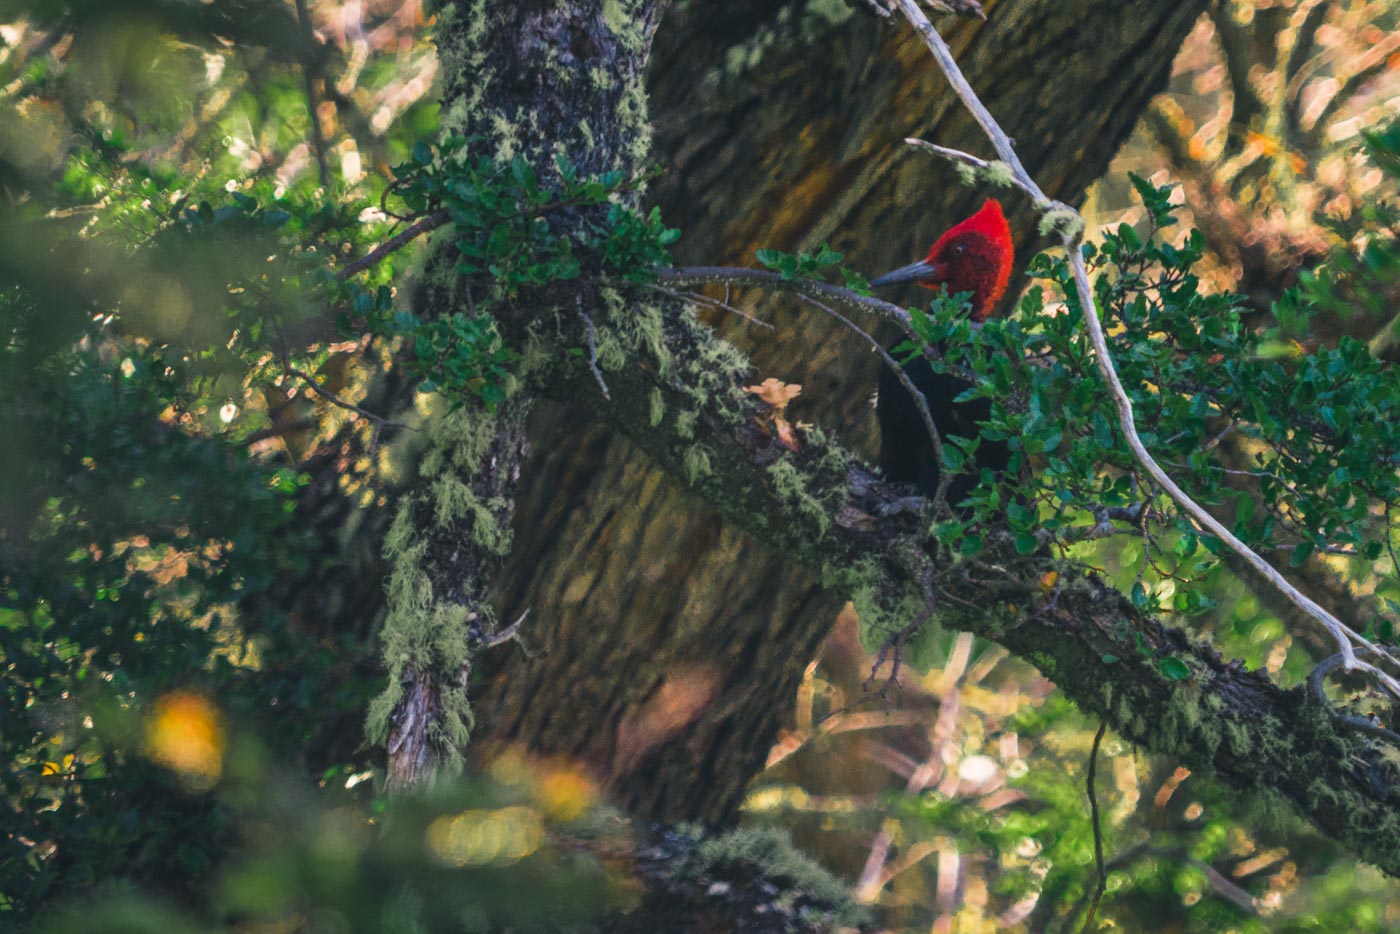 Male Magellanic Woodpecker searching for wood-boring grubs and beetles on a tree in Patagonia, Chile